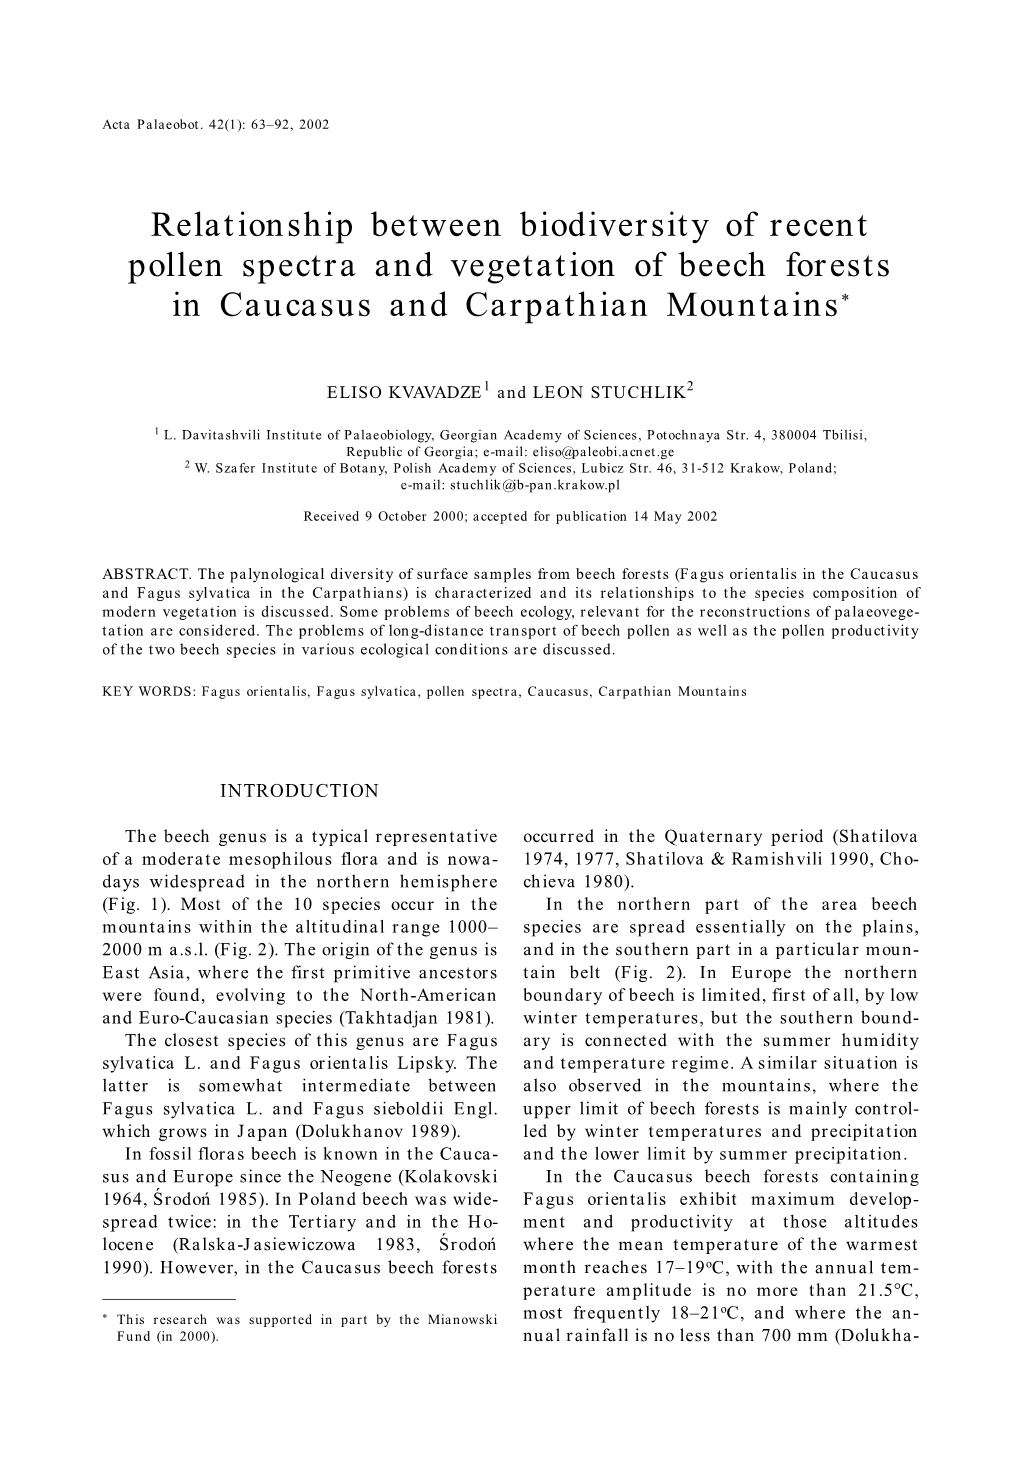 Relationship Between Biodiversity of Recent Pollen Spectra and Vegetation of Beech Forests in Caucasus and Carpathian Mountains*